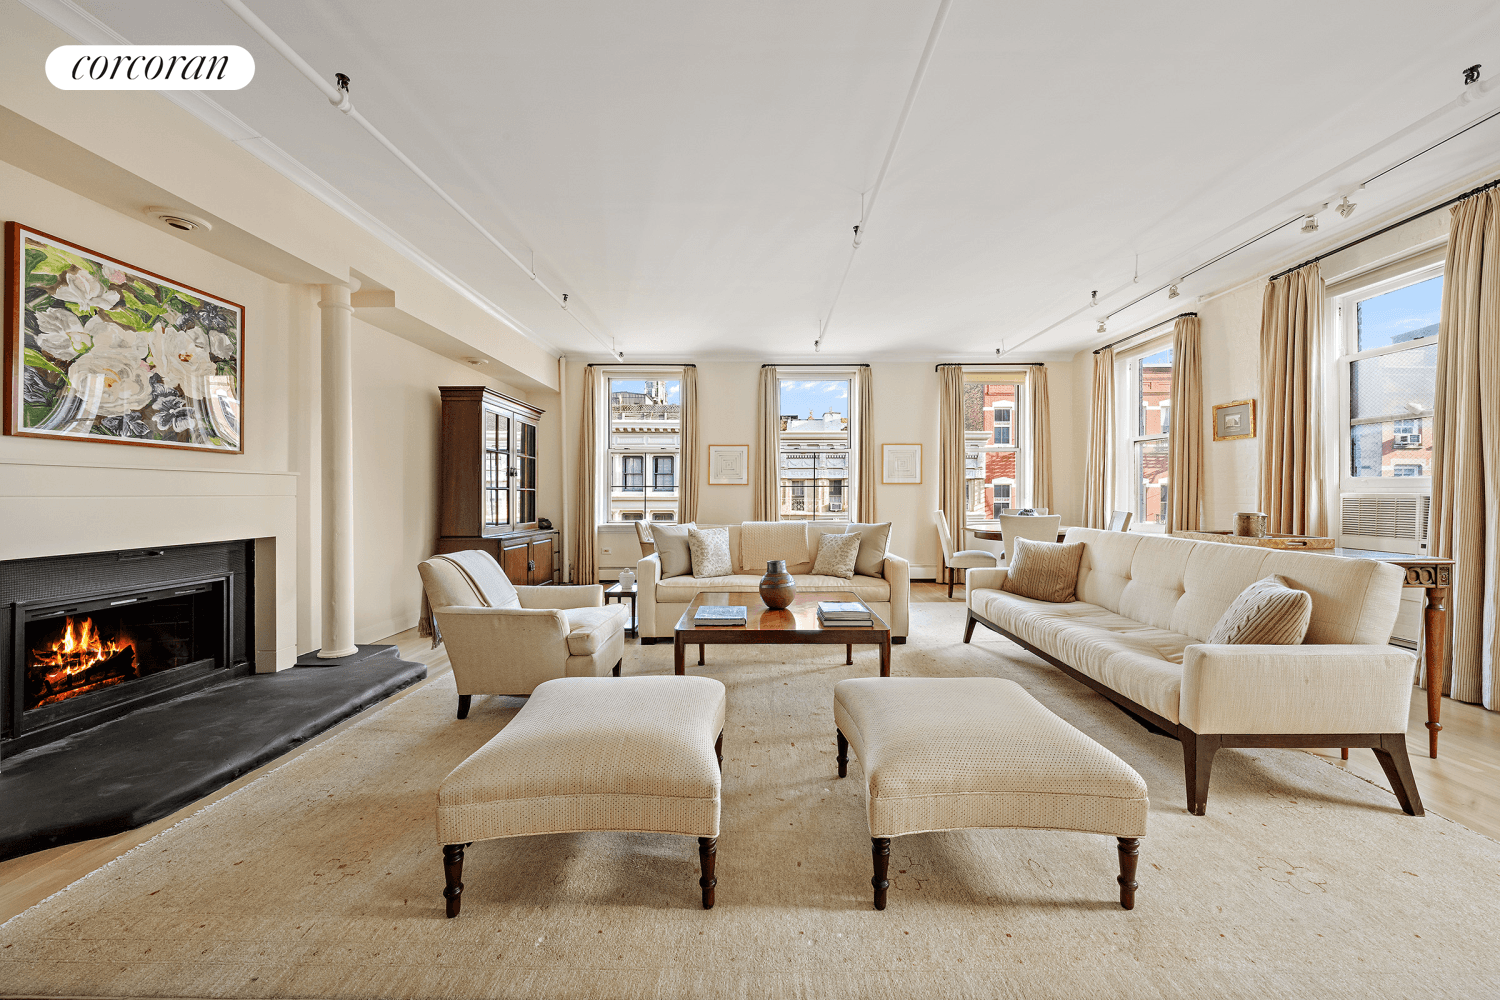 This bright, sophisticated SoHo loft is located on one of the most desirable blocks on West Broadway between Prince and Spring.